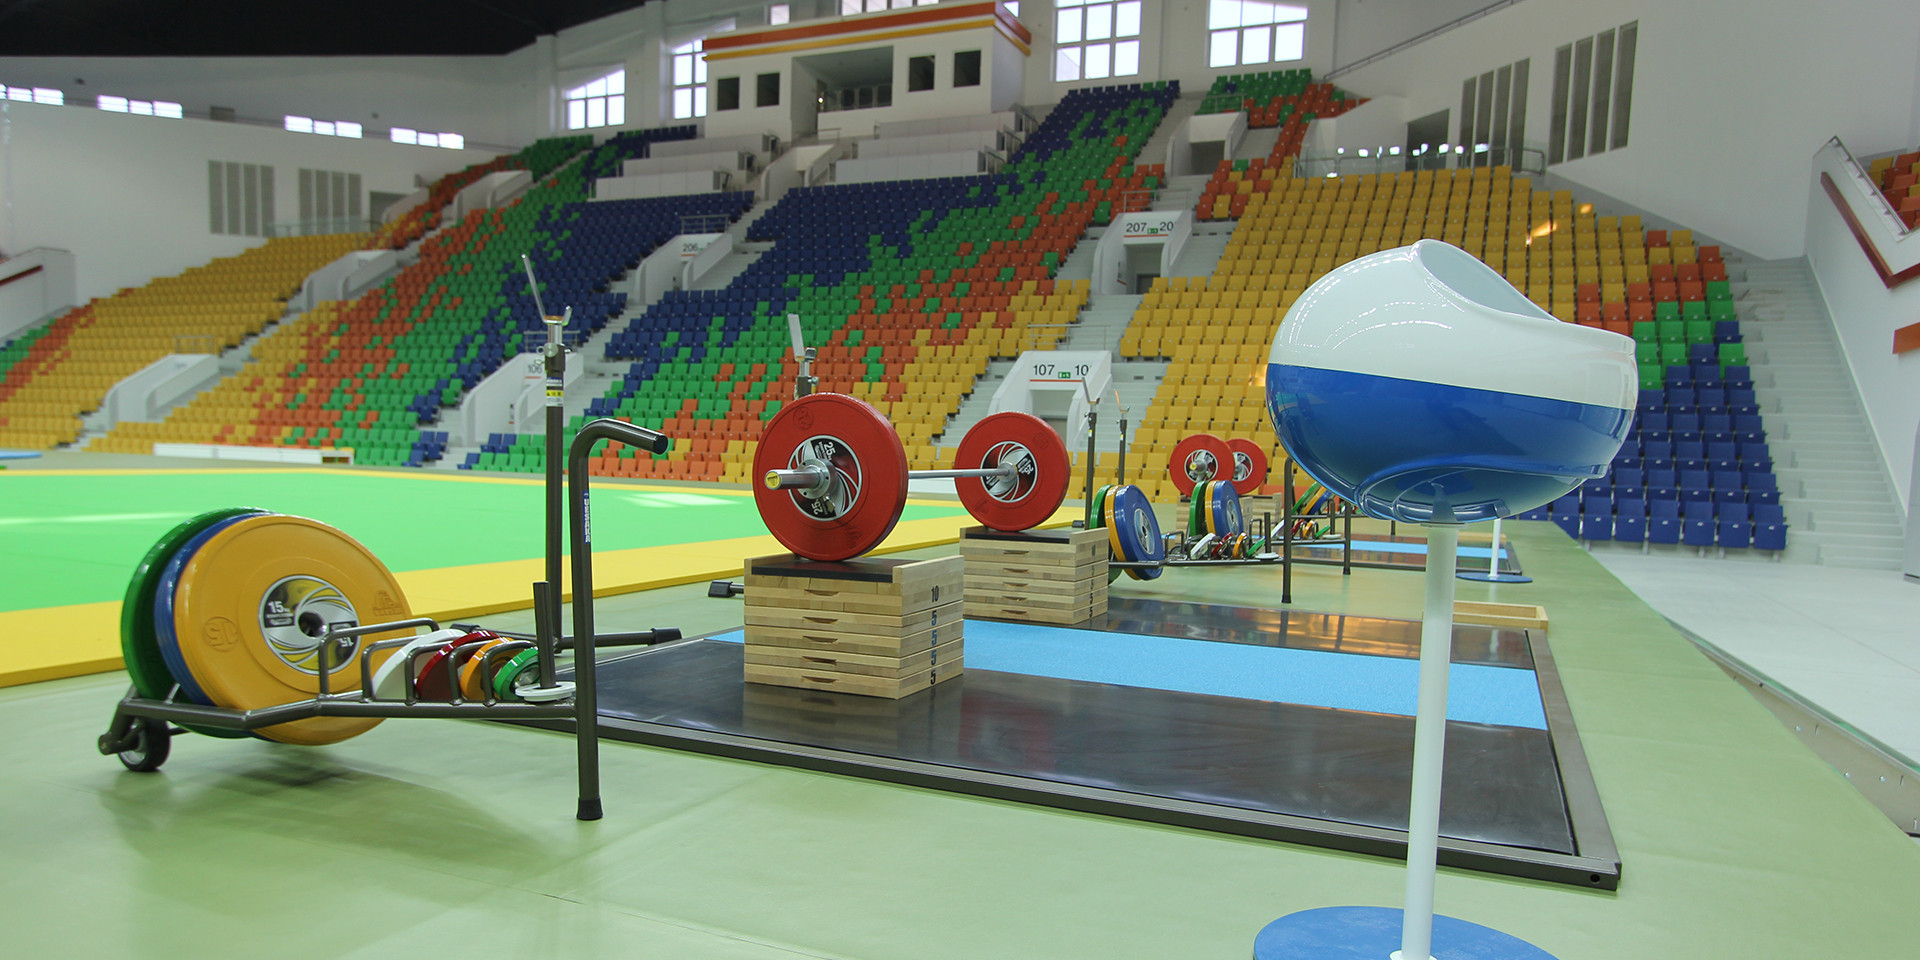 China's Liao strikes weightlifting gold on day four of Ashgabat 2017